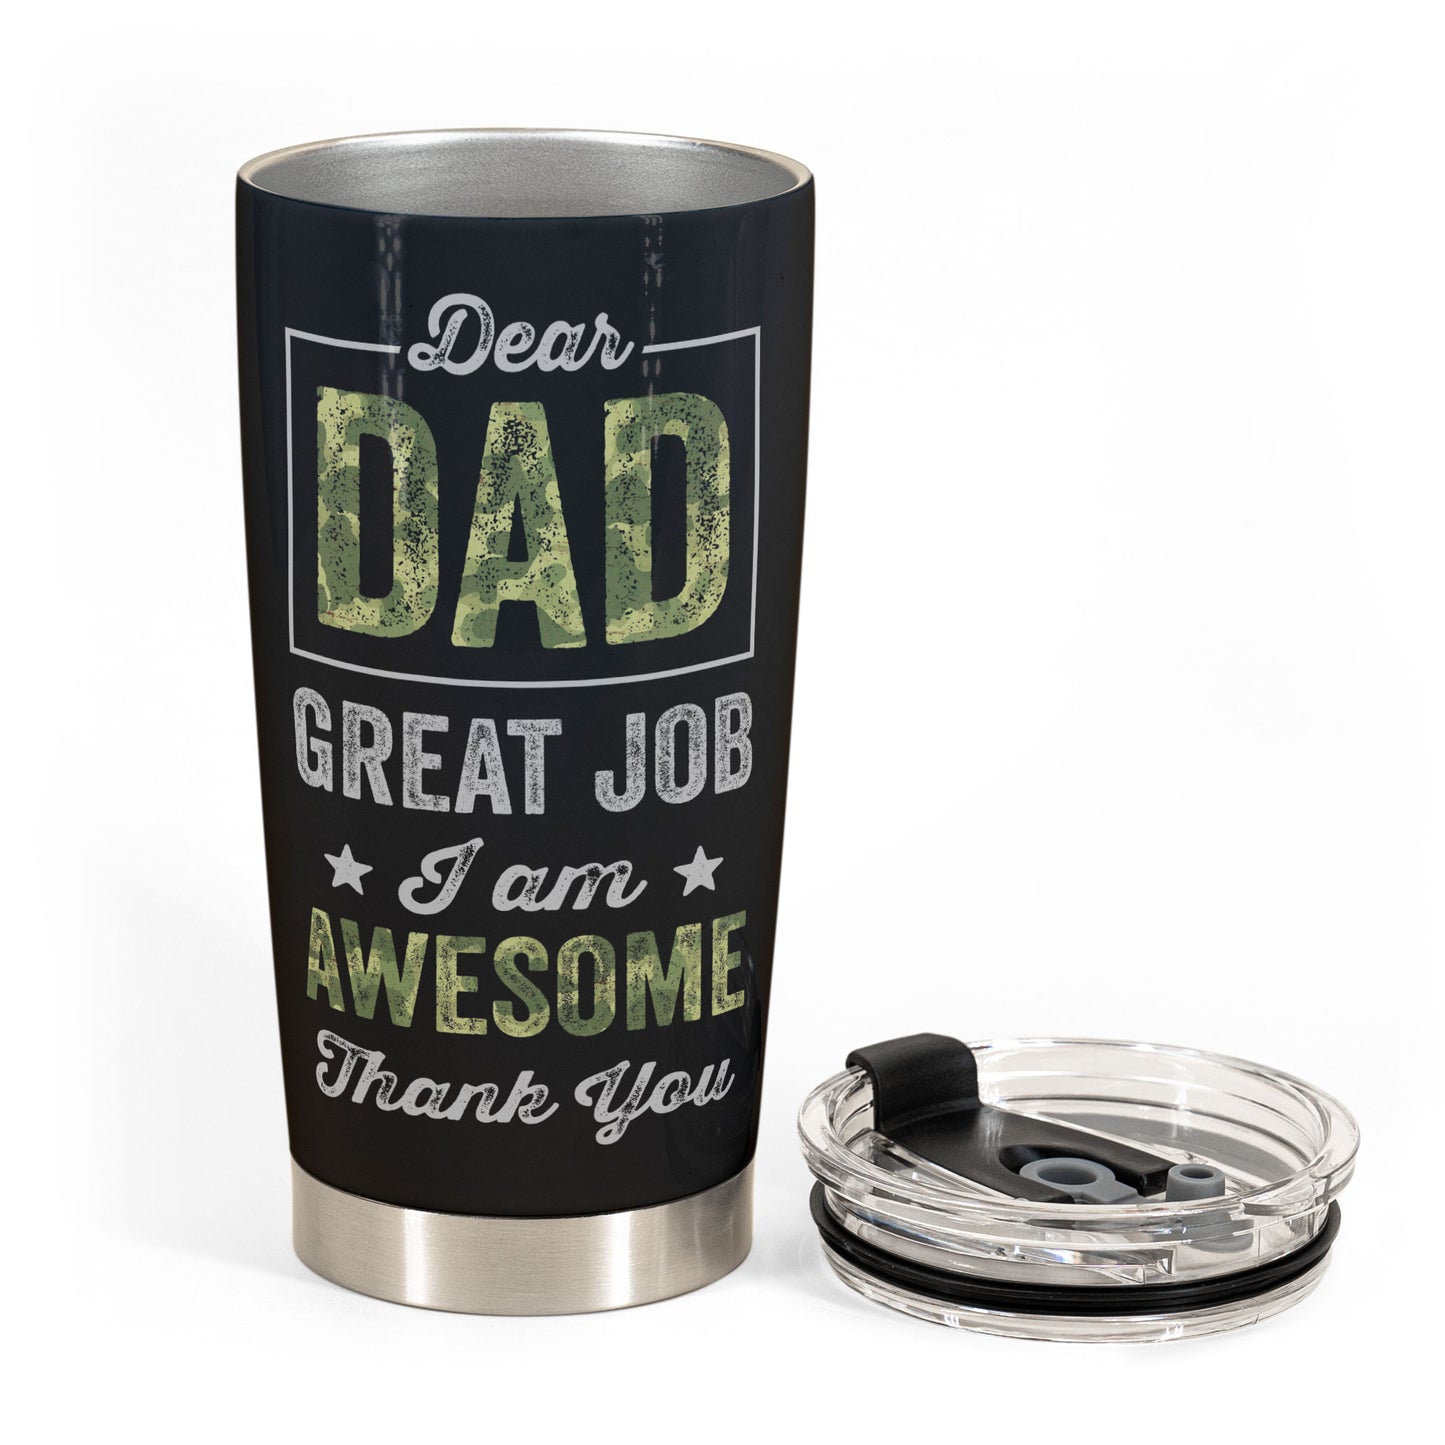 Dear Dad, Great Job, Thank You - Personalized Tumbler Cup - Birthday, Christmas Gift For Dad, Father, Papa